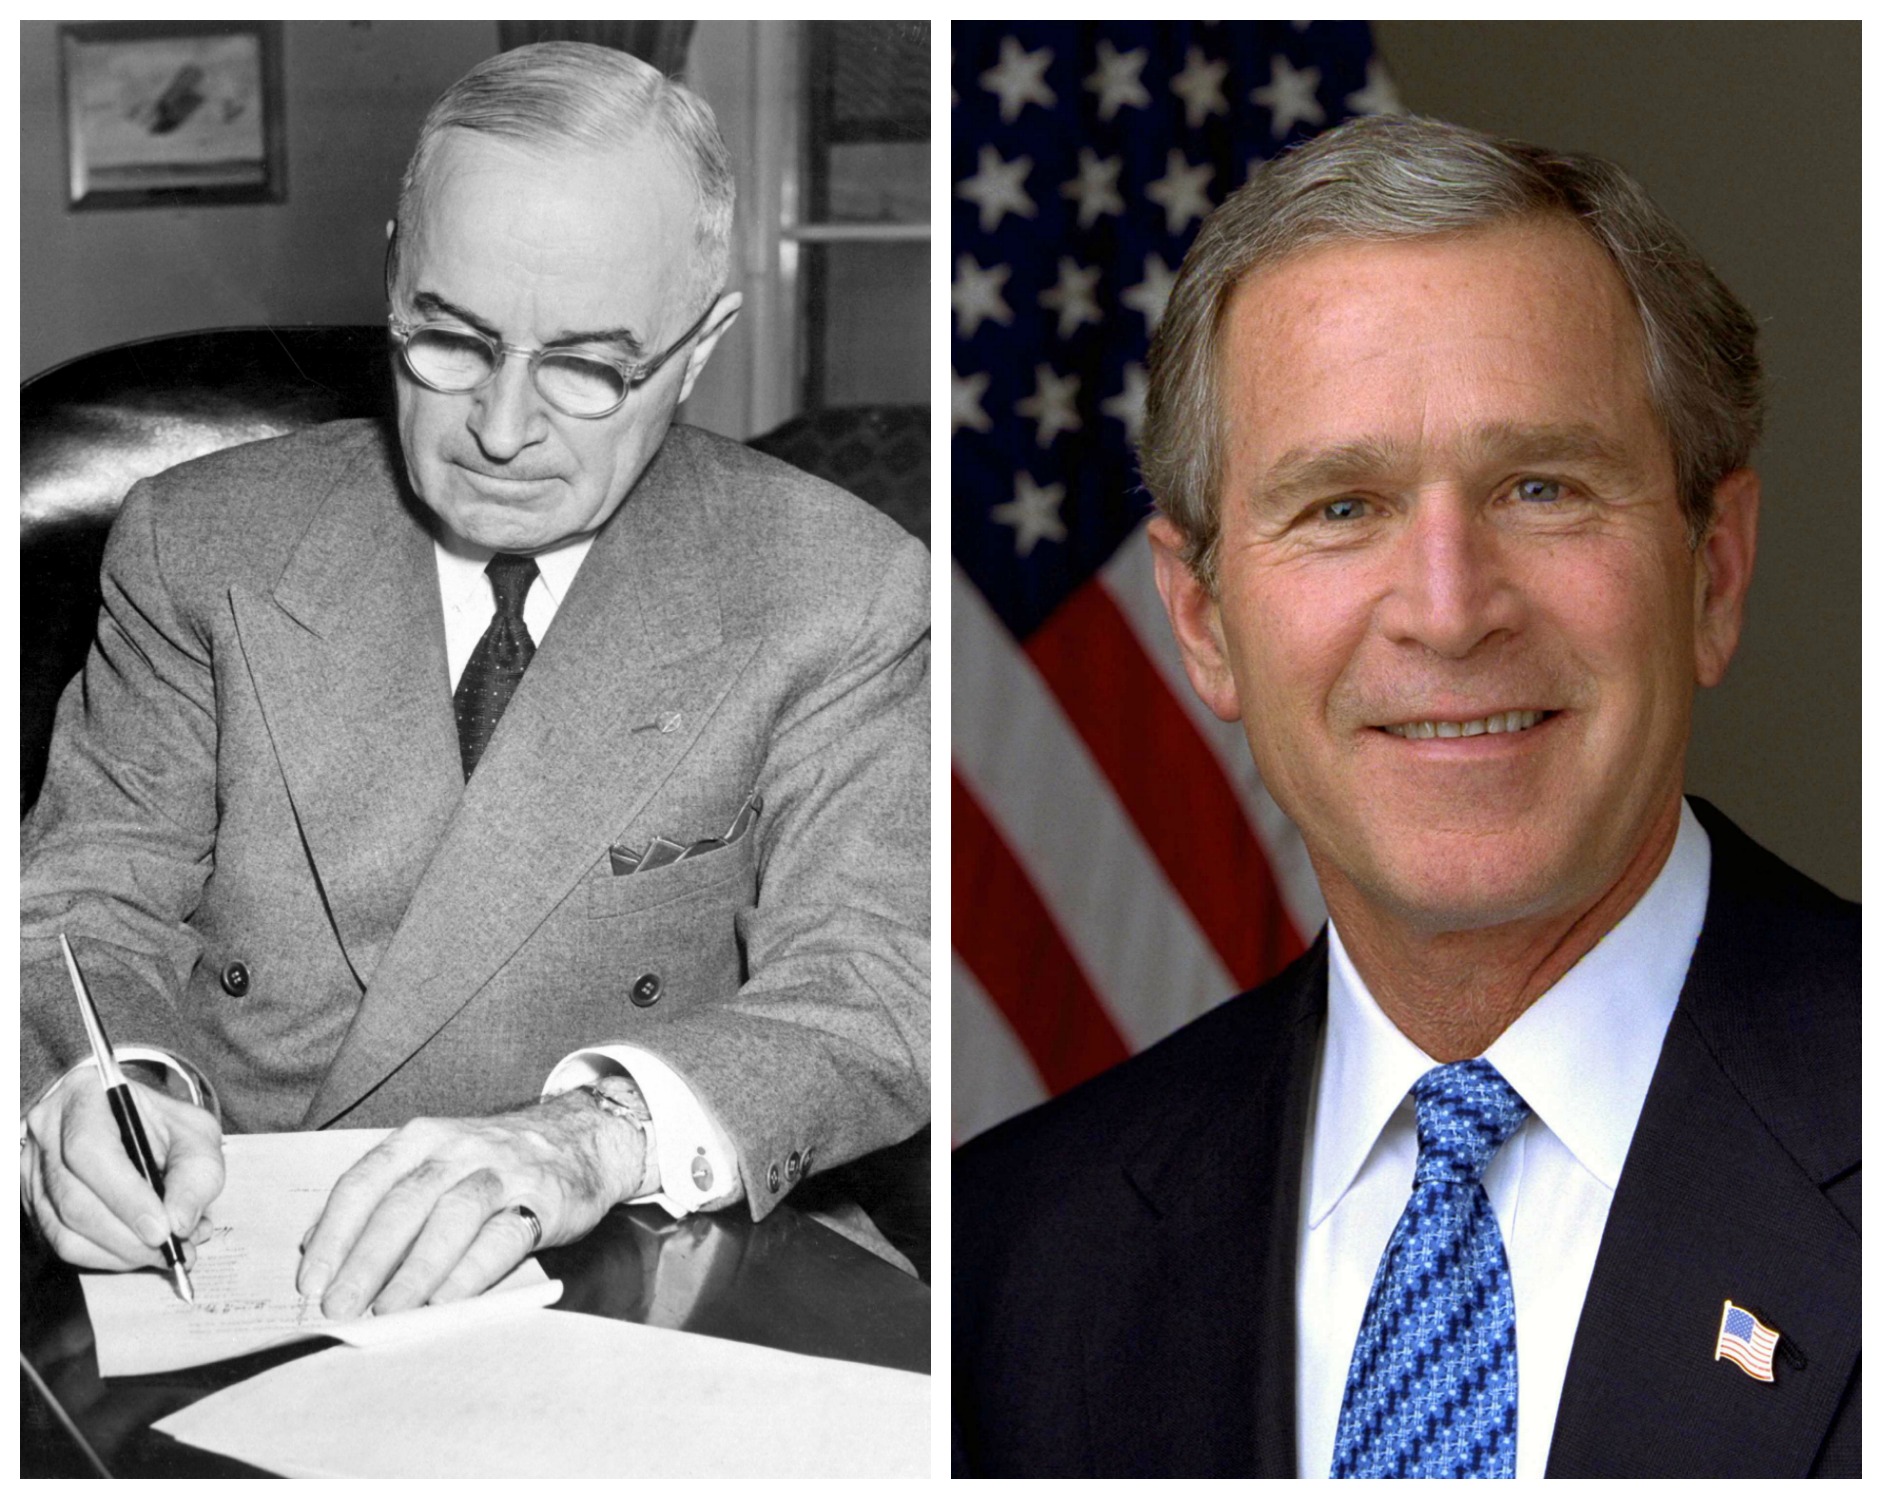 Harry Truman in one picture, and George W. Bush in the other